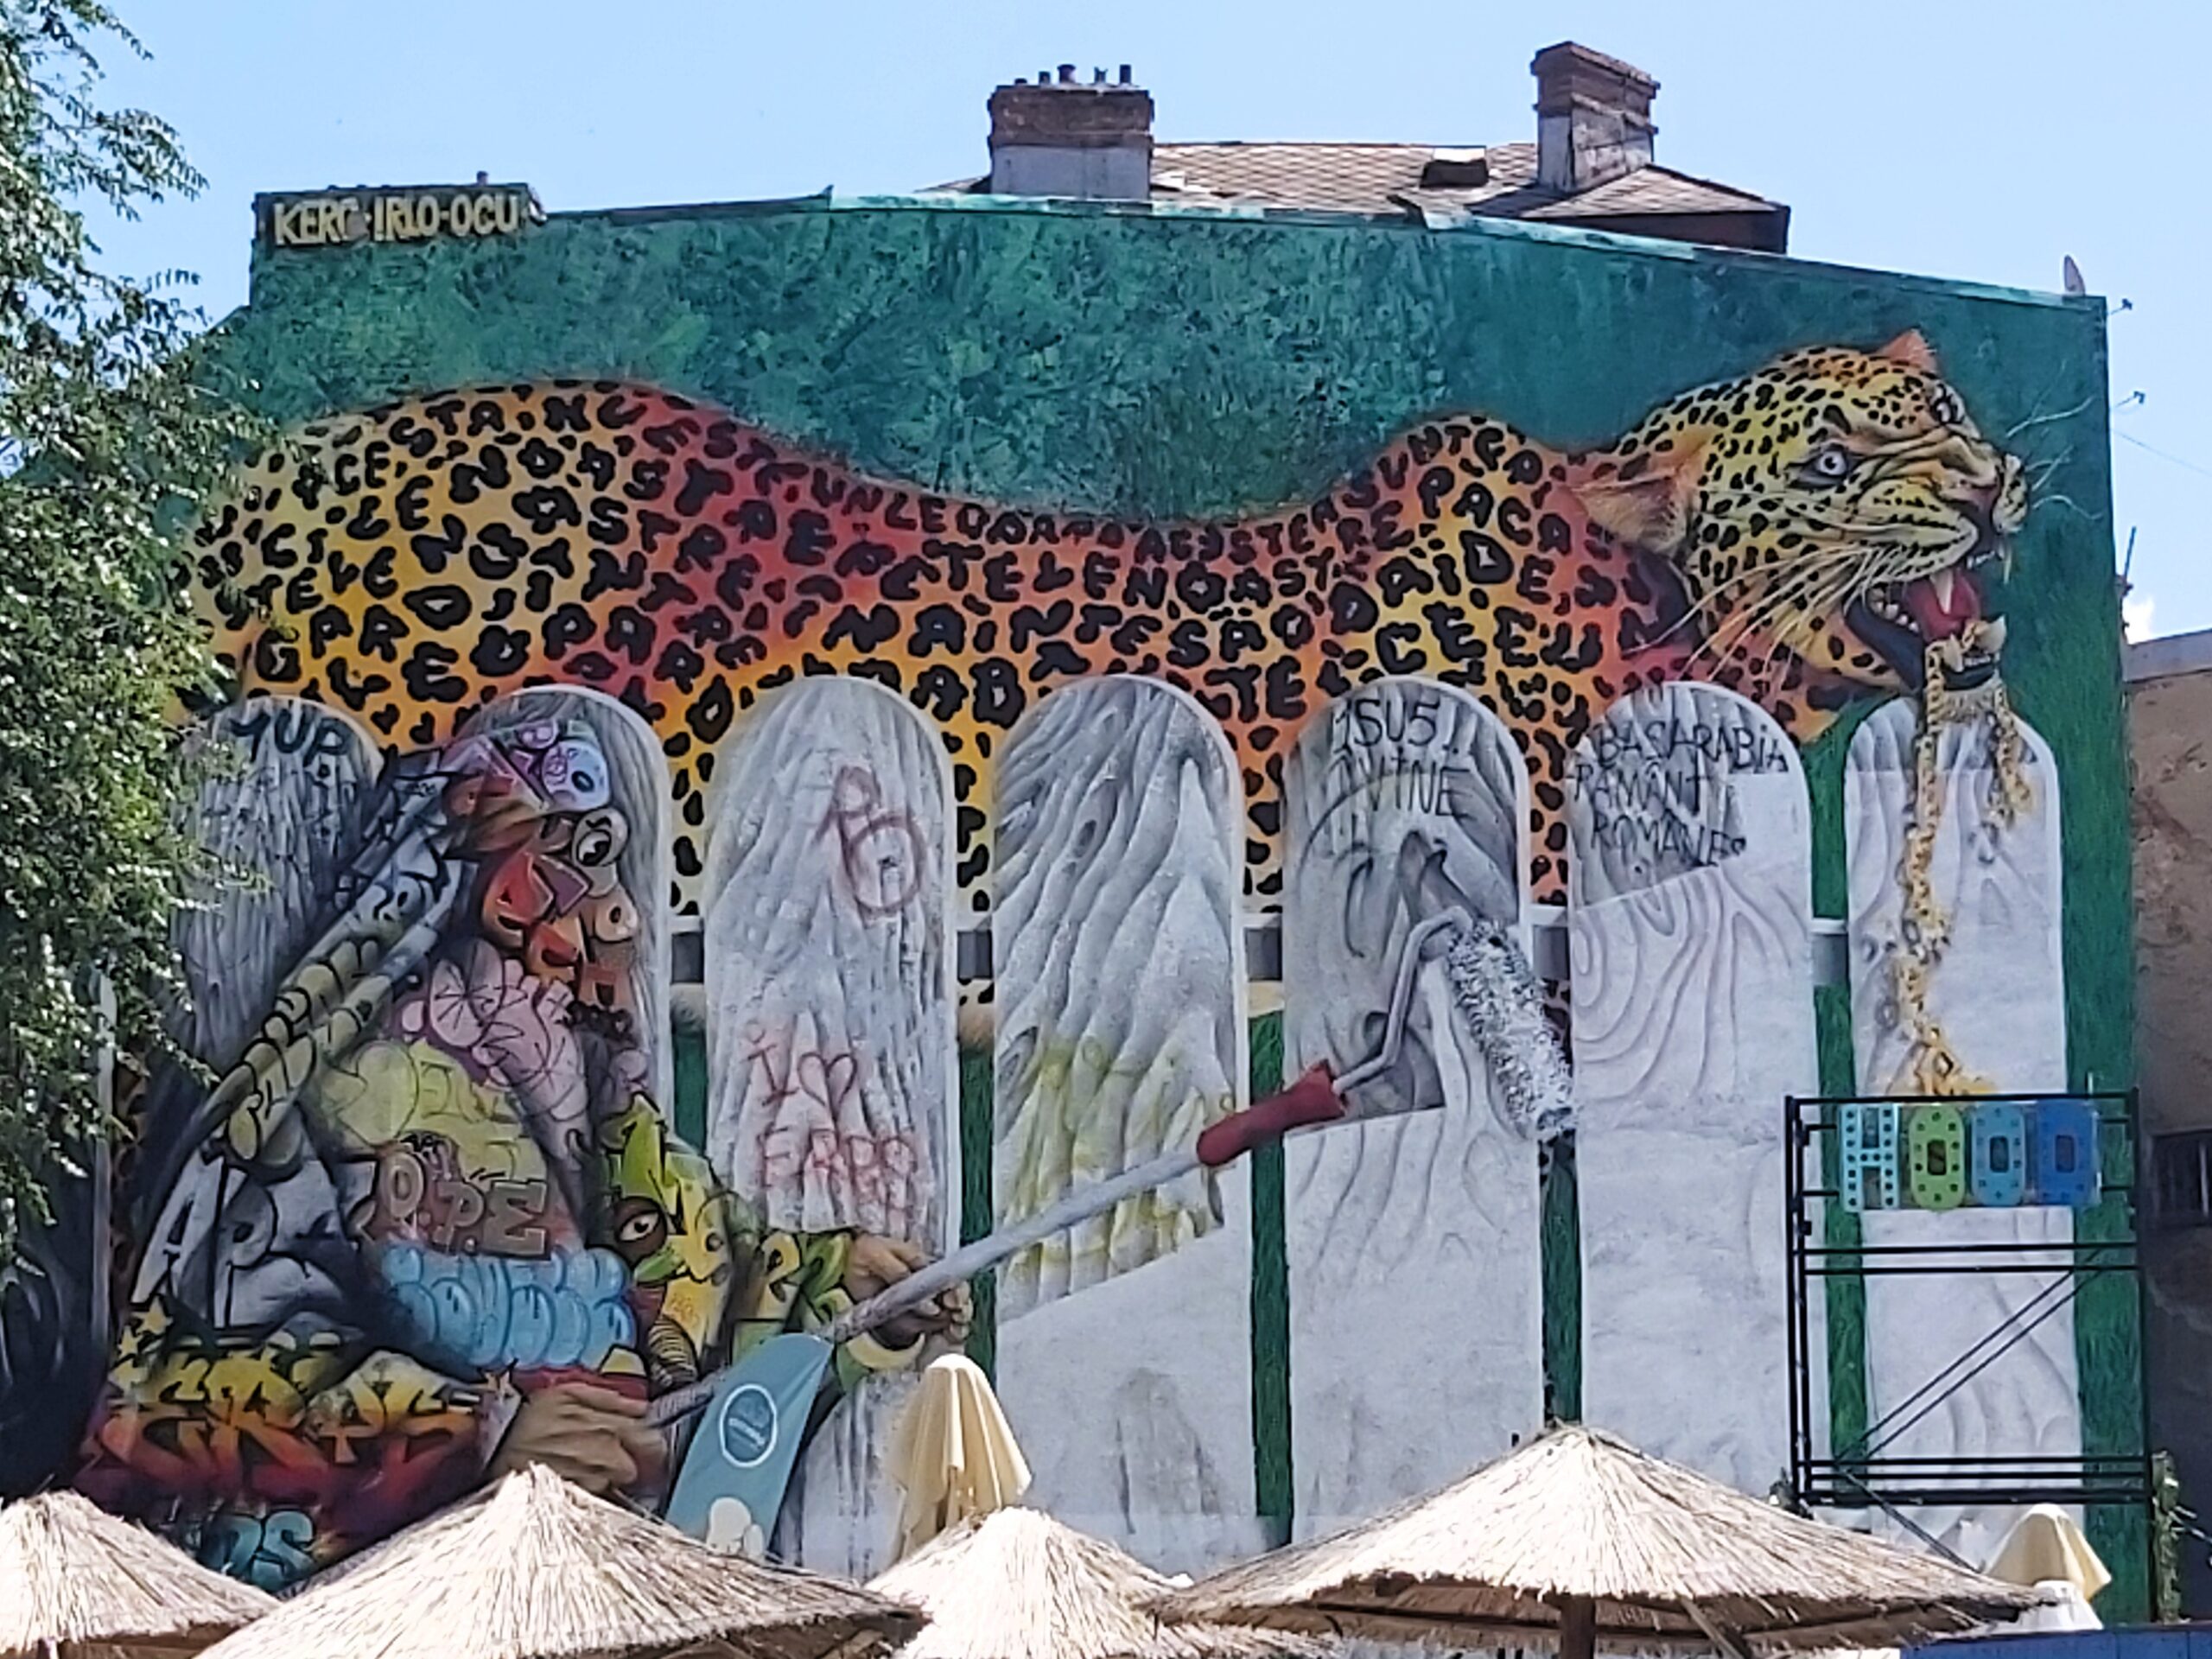 A colourful mural of a leopard on the side of a building in București, Romania